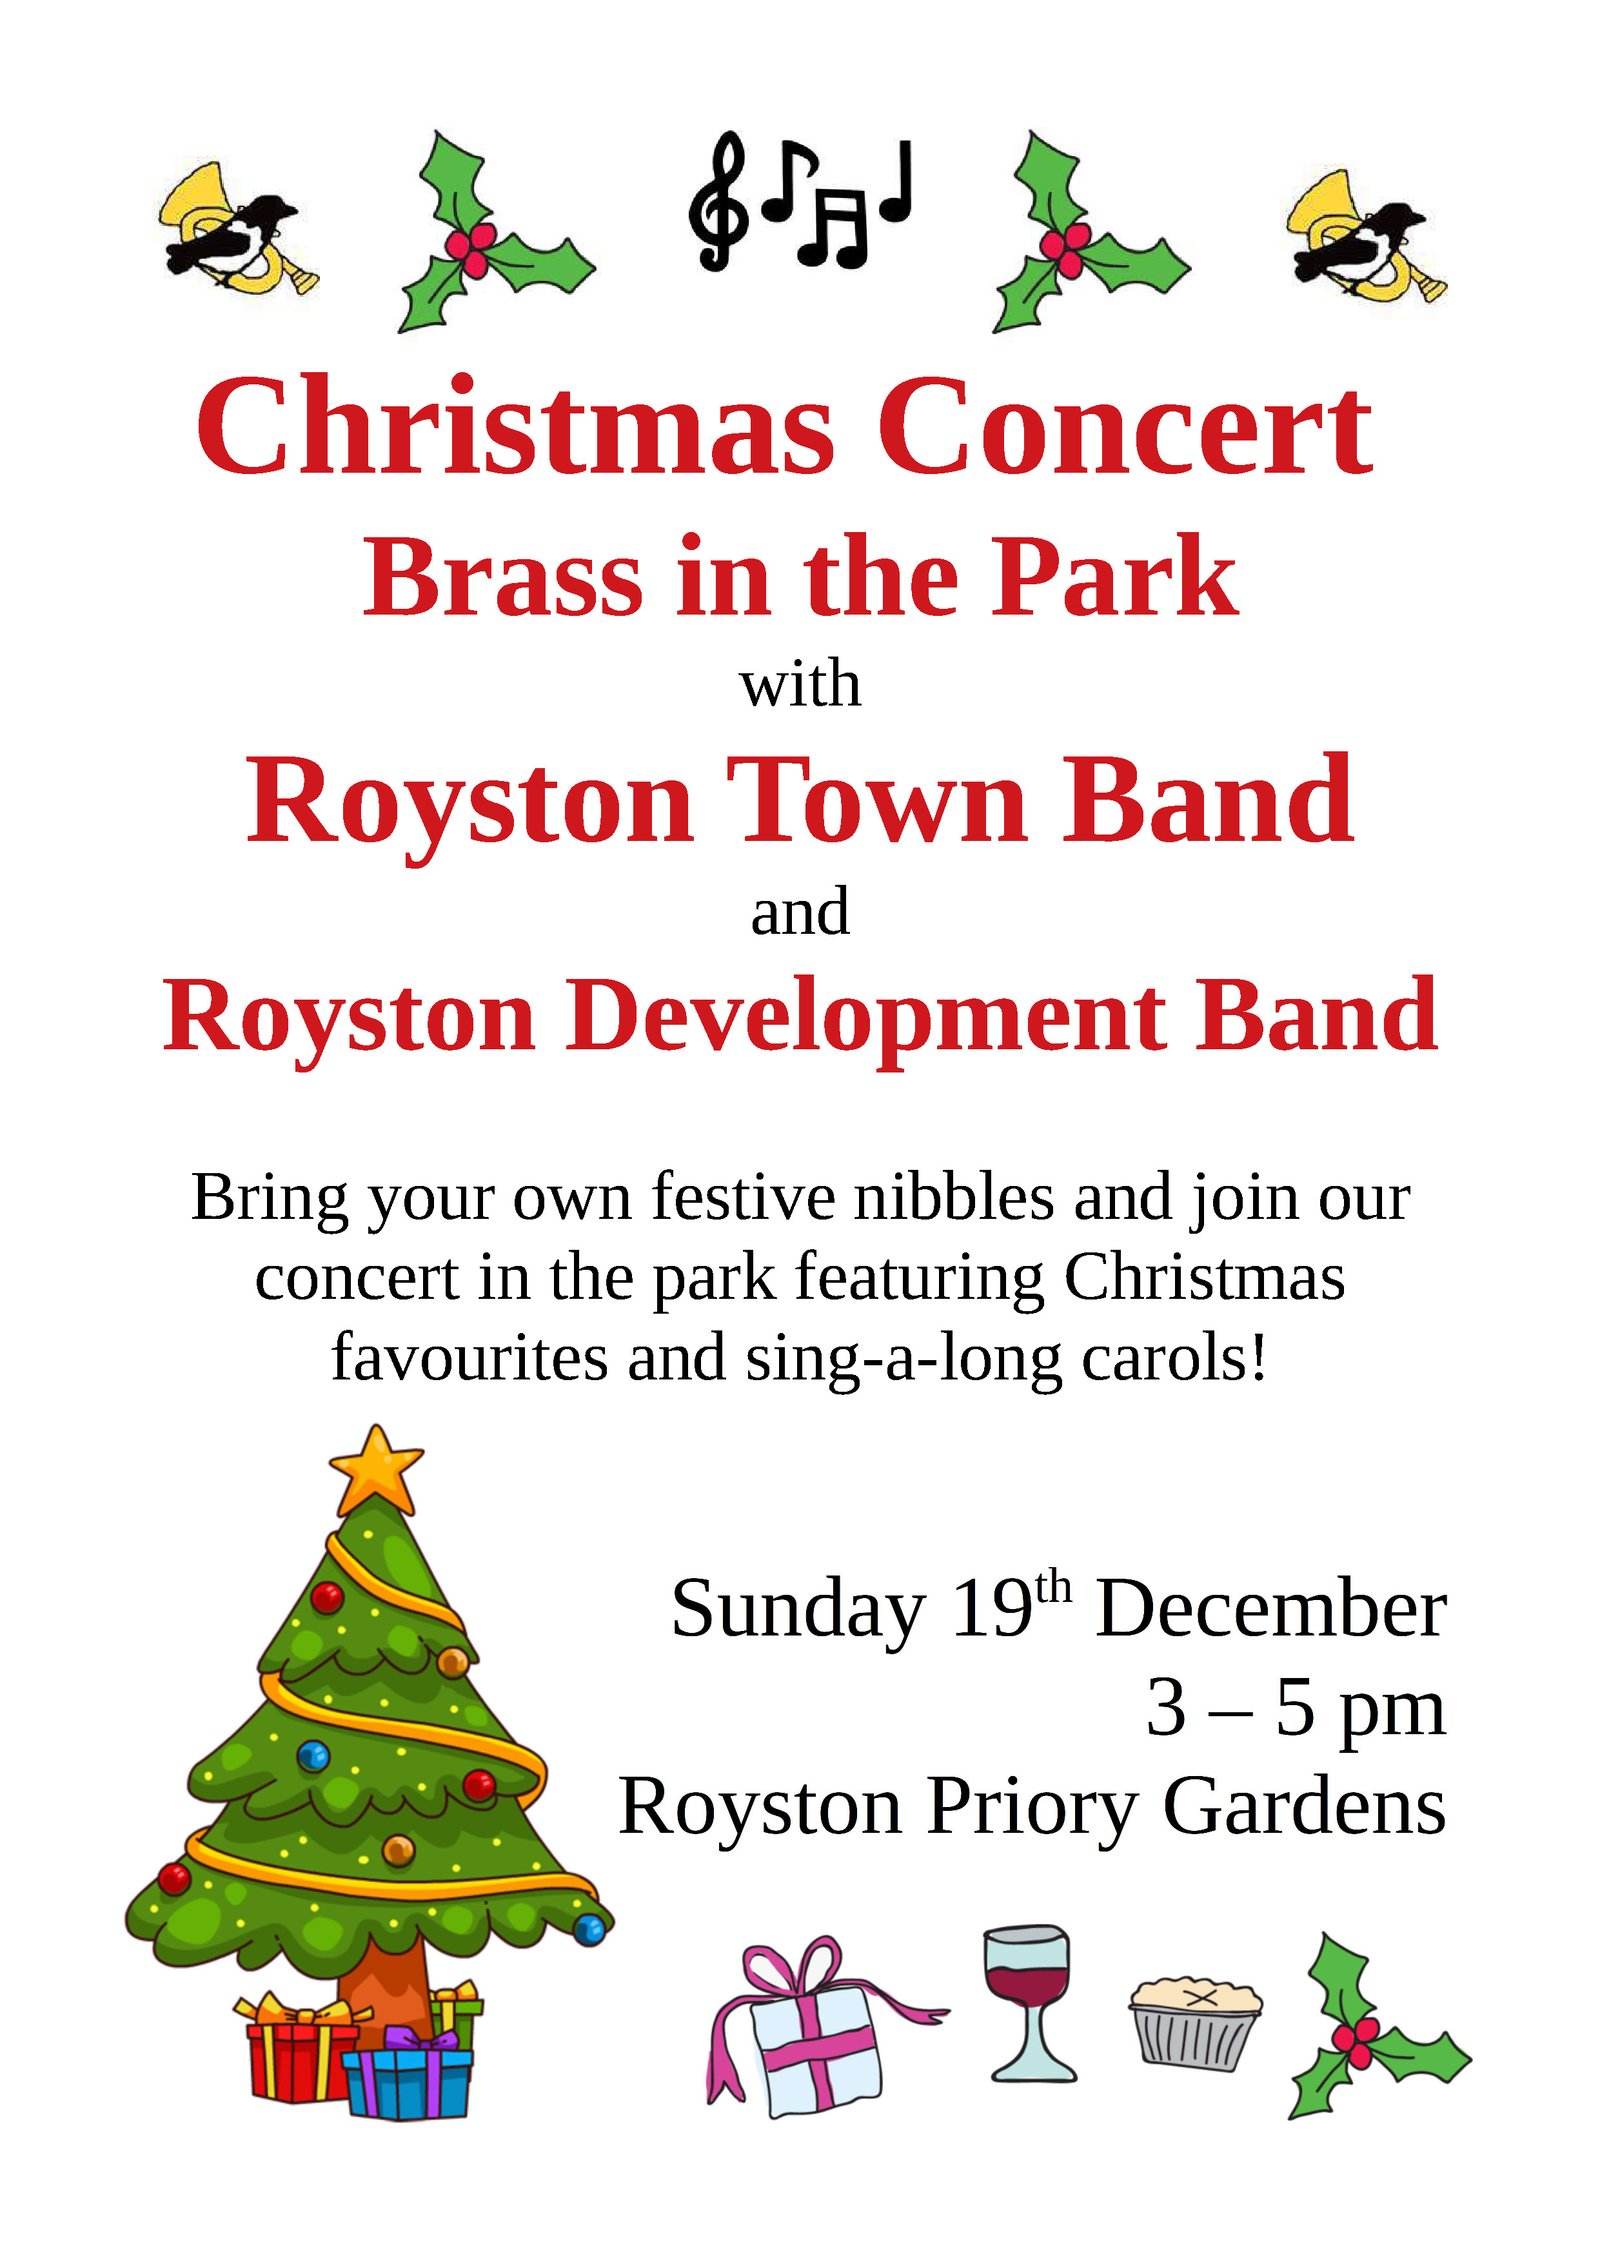 Royston Town Band Outdoor Christmas Concert @ Priory Gardens Band Stand, Royston | England | United Kingdom